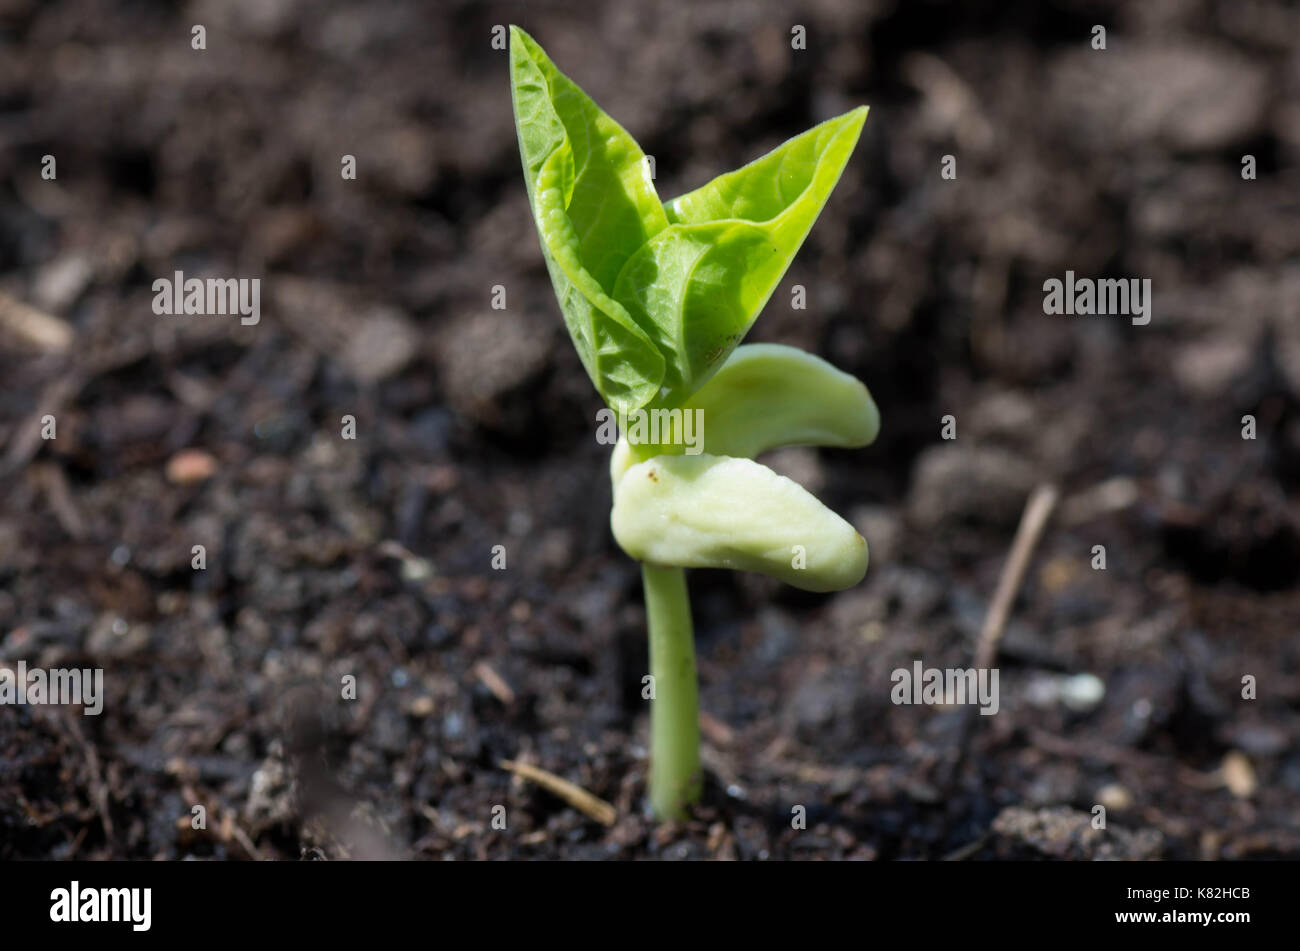 Close up of Bean plant in organic soil Stock Photo